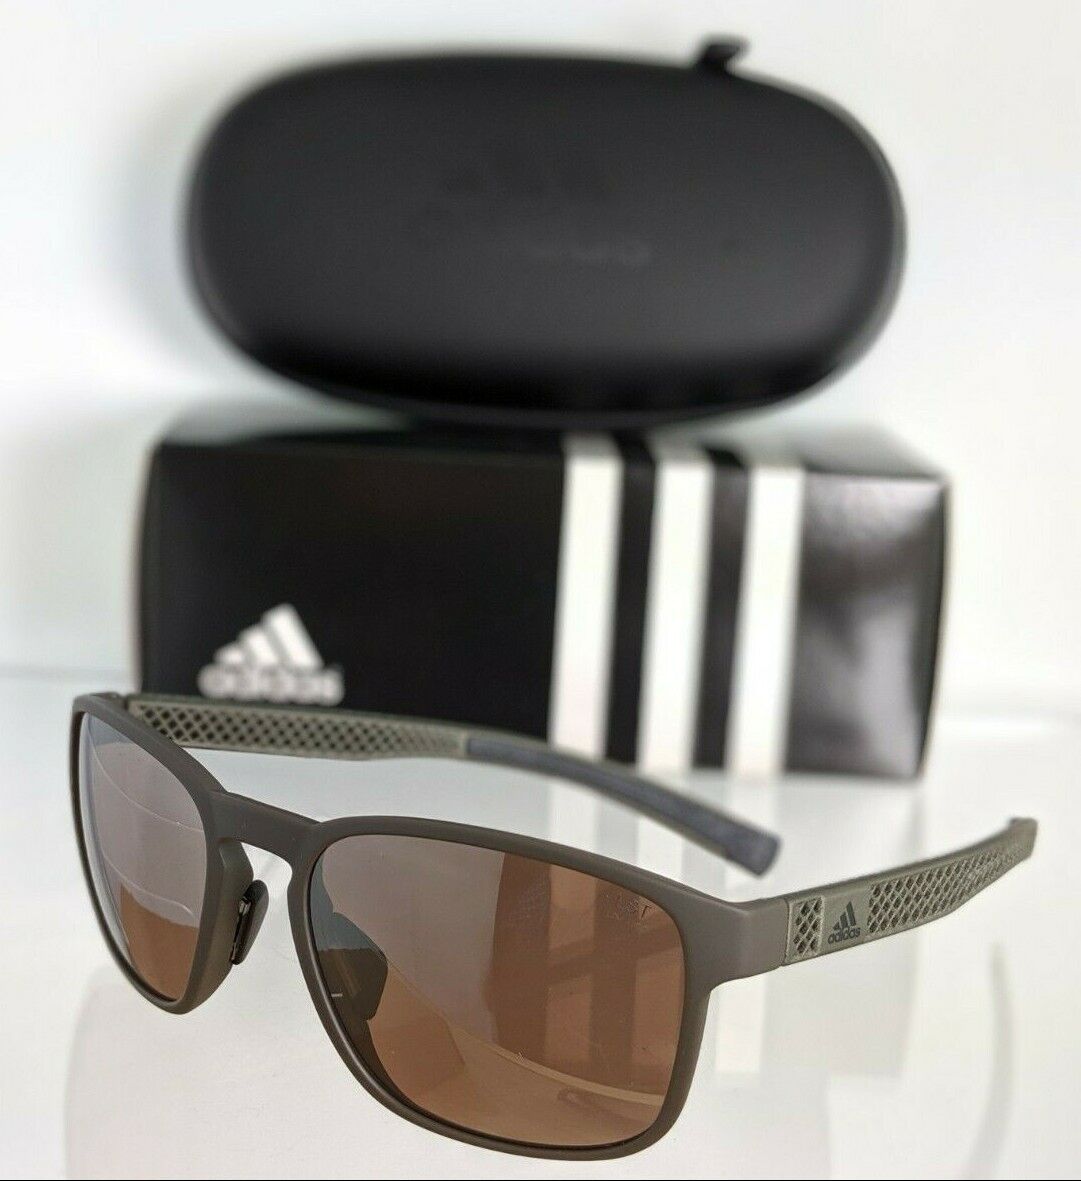 Brand New Authentic Adidas Sunglasses AD 36 75 5500 Protean 3D_X AD36